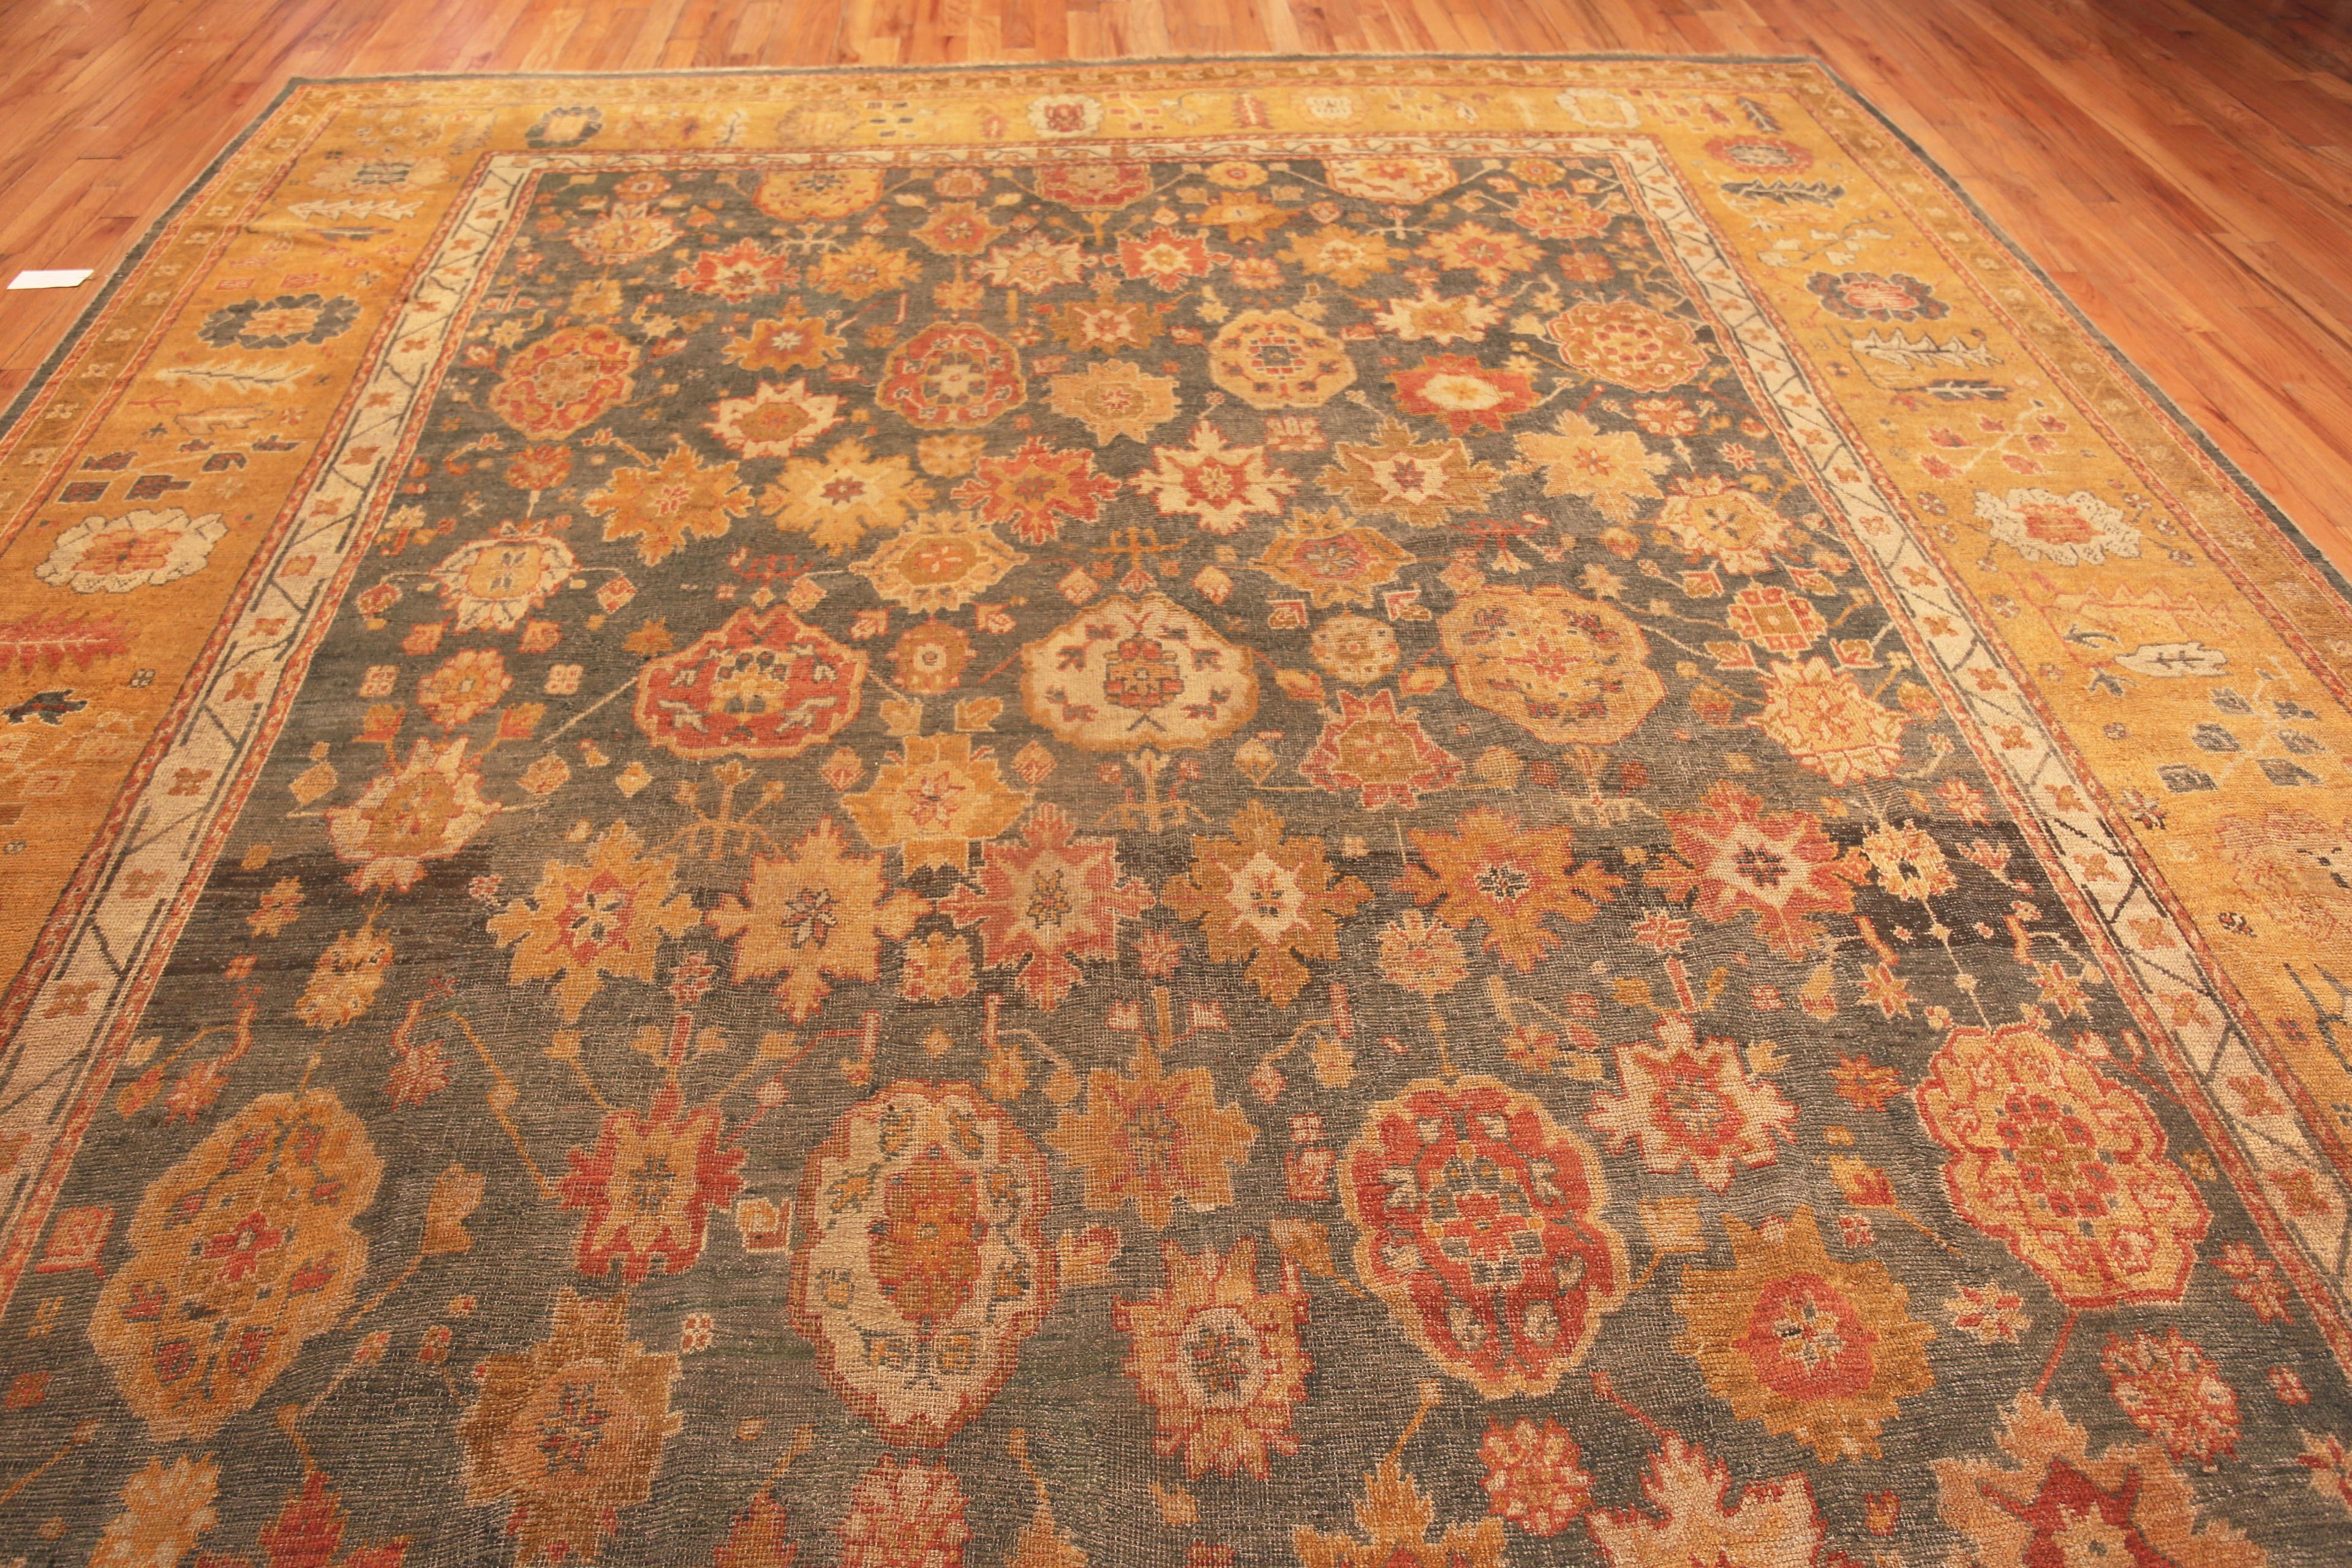 Warm Decorative Large Rustic Antique Tribal Abrash Turkish Oushak Rug, Country of Origin: Turkey, Circa date: 1900. Size: 12 ft 6 in x 15 ft 2 in (3.81 m x 4.62 m)